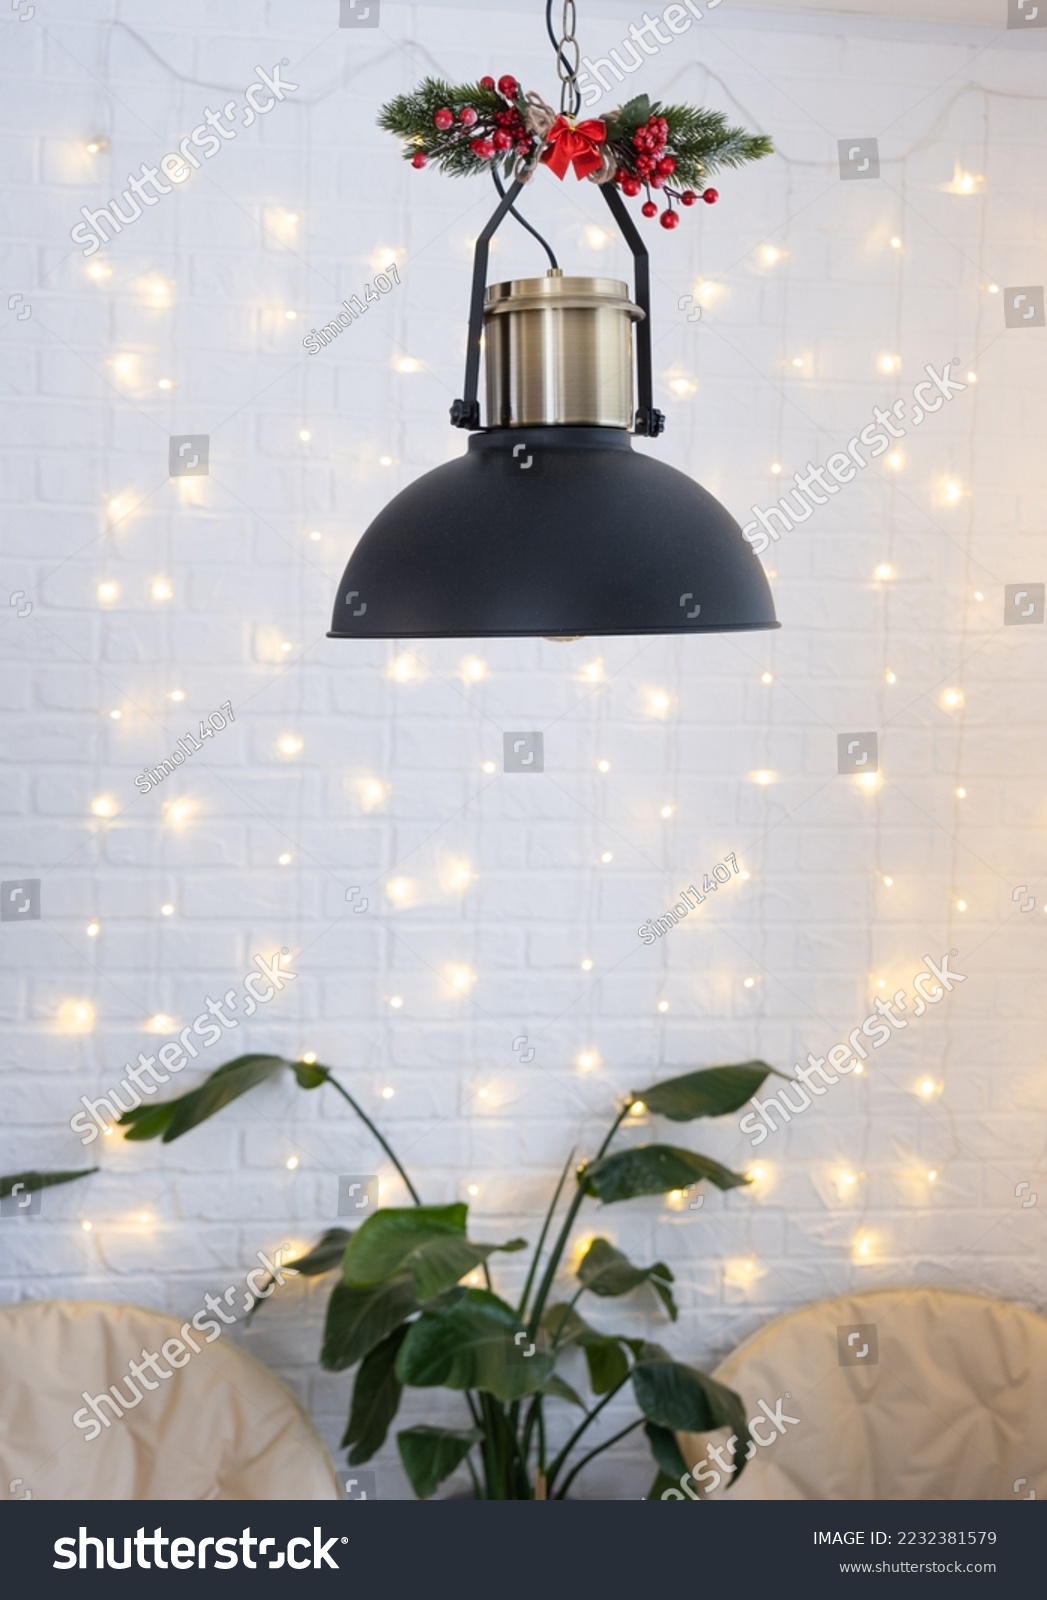 Christmas interior of a loft-style house with a black decorated retro lampshade and indoor plants of Strelitzia nicolai. New Year, comfort at home #2232381579